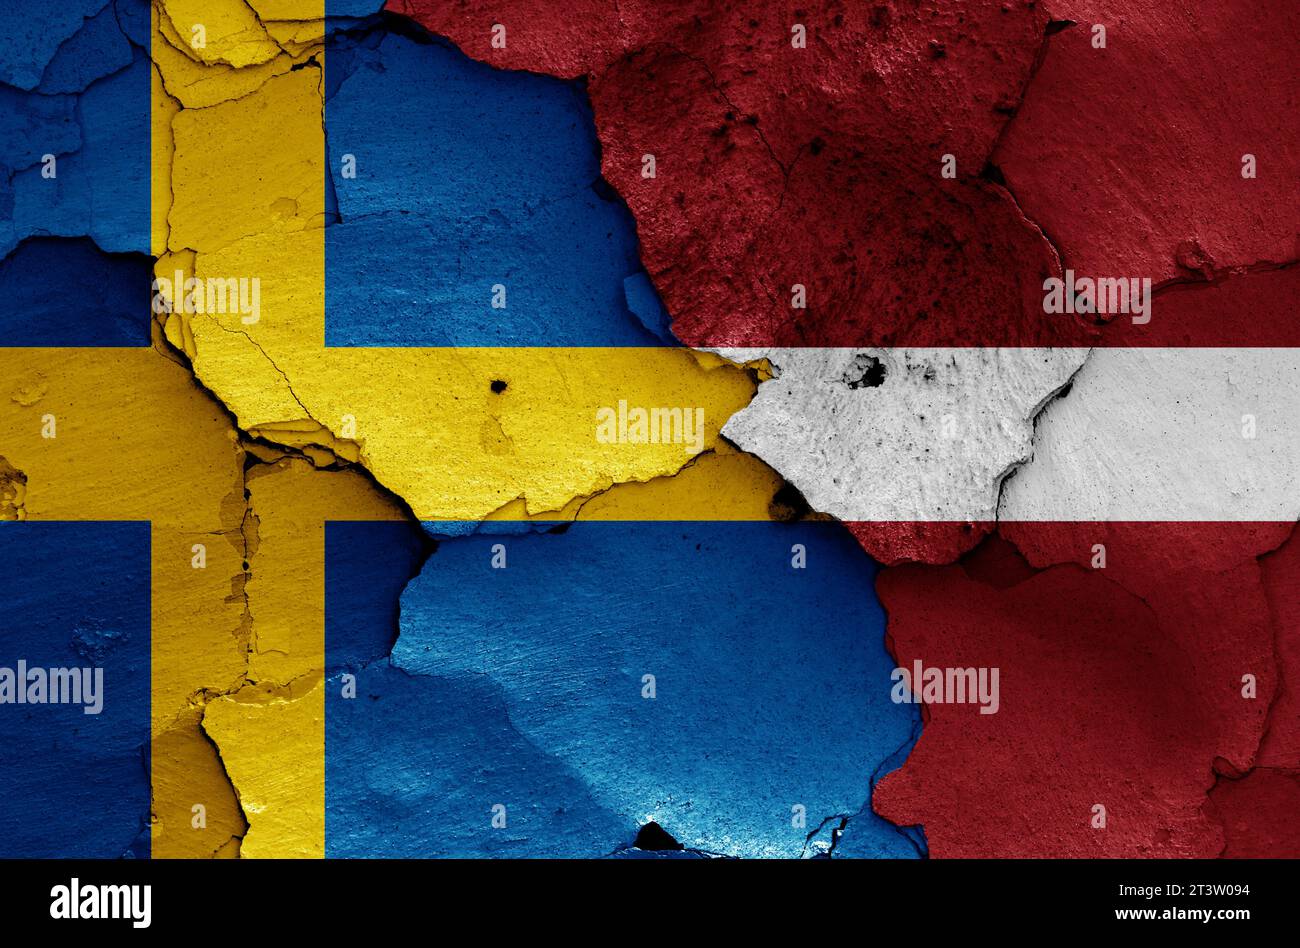 flags of Sweden and Latvia painted on cracked wall Stock Photo